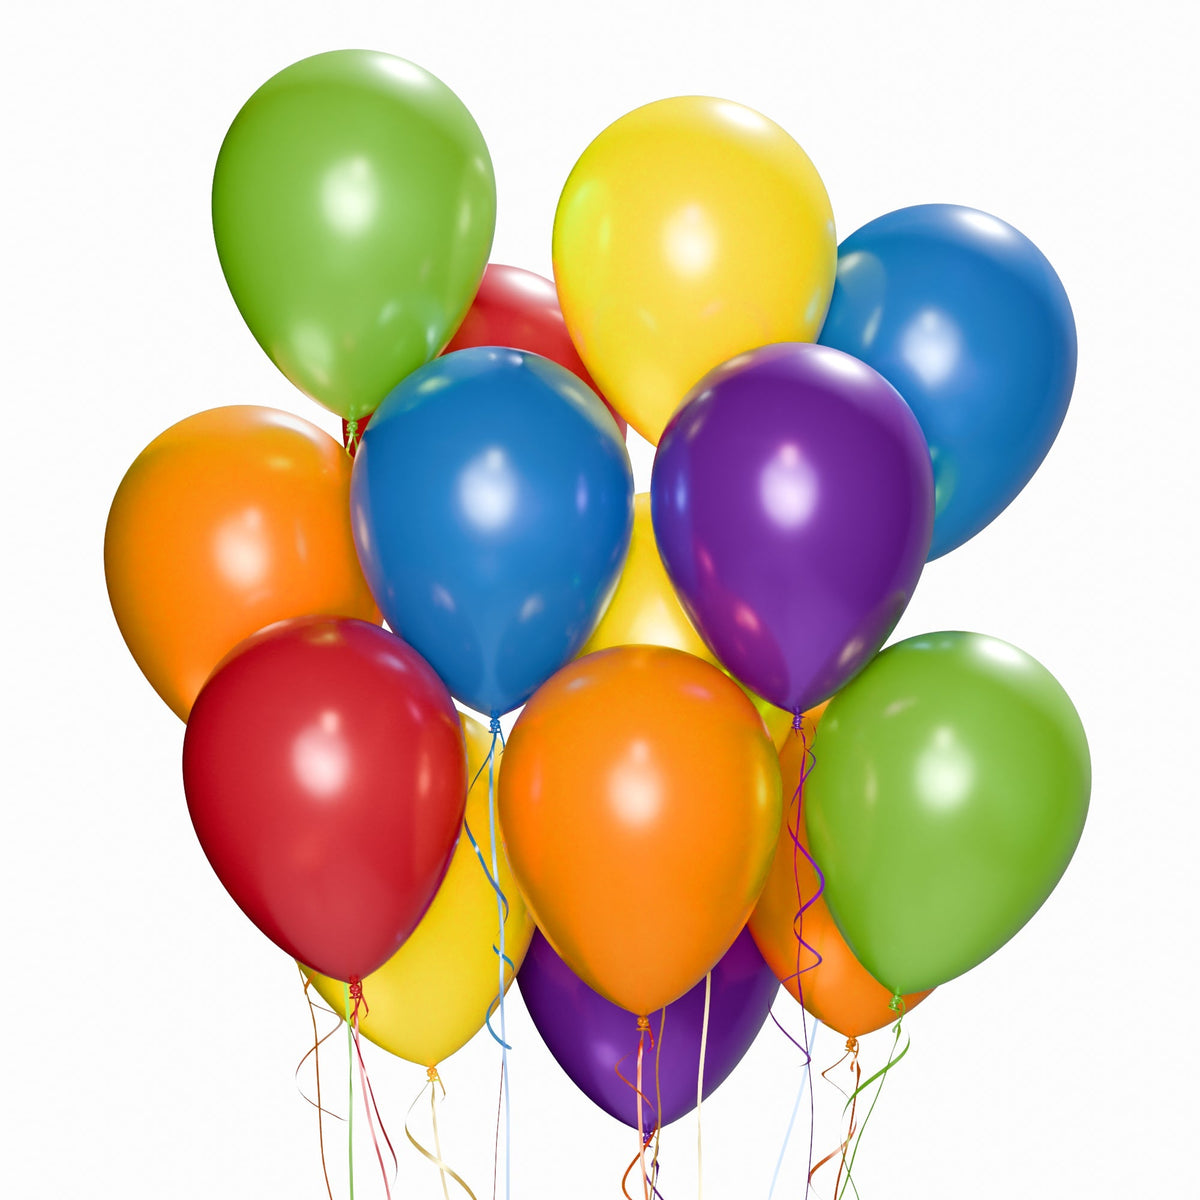 WIDE OCEAN INTERNATIONAL TRADE BEIJING CO., LTD Balloons Assorted Colors Latex Balloon 12 Inches, 15 Count 810064198229